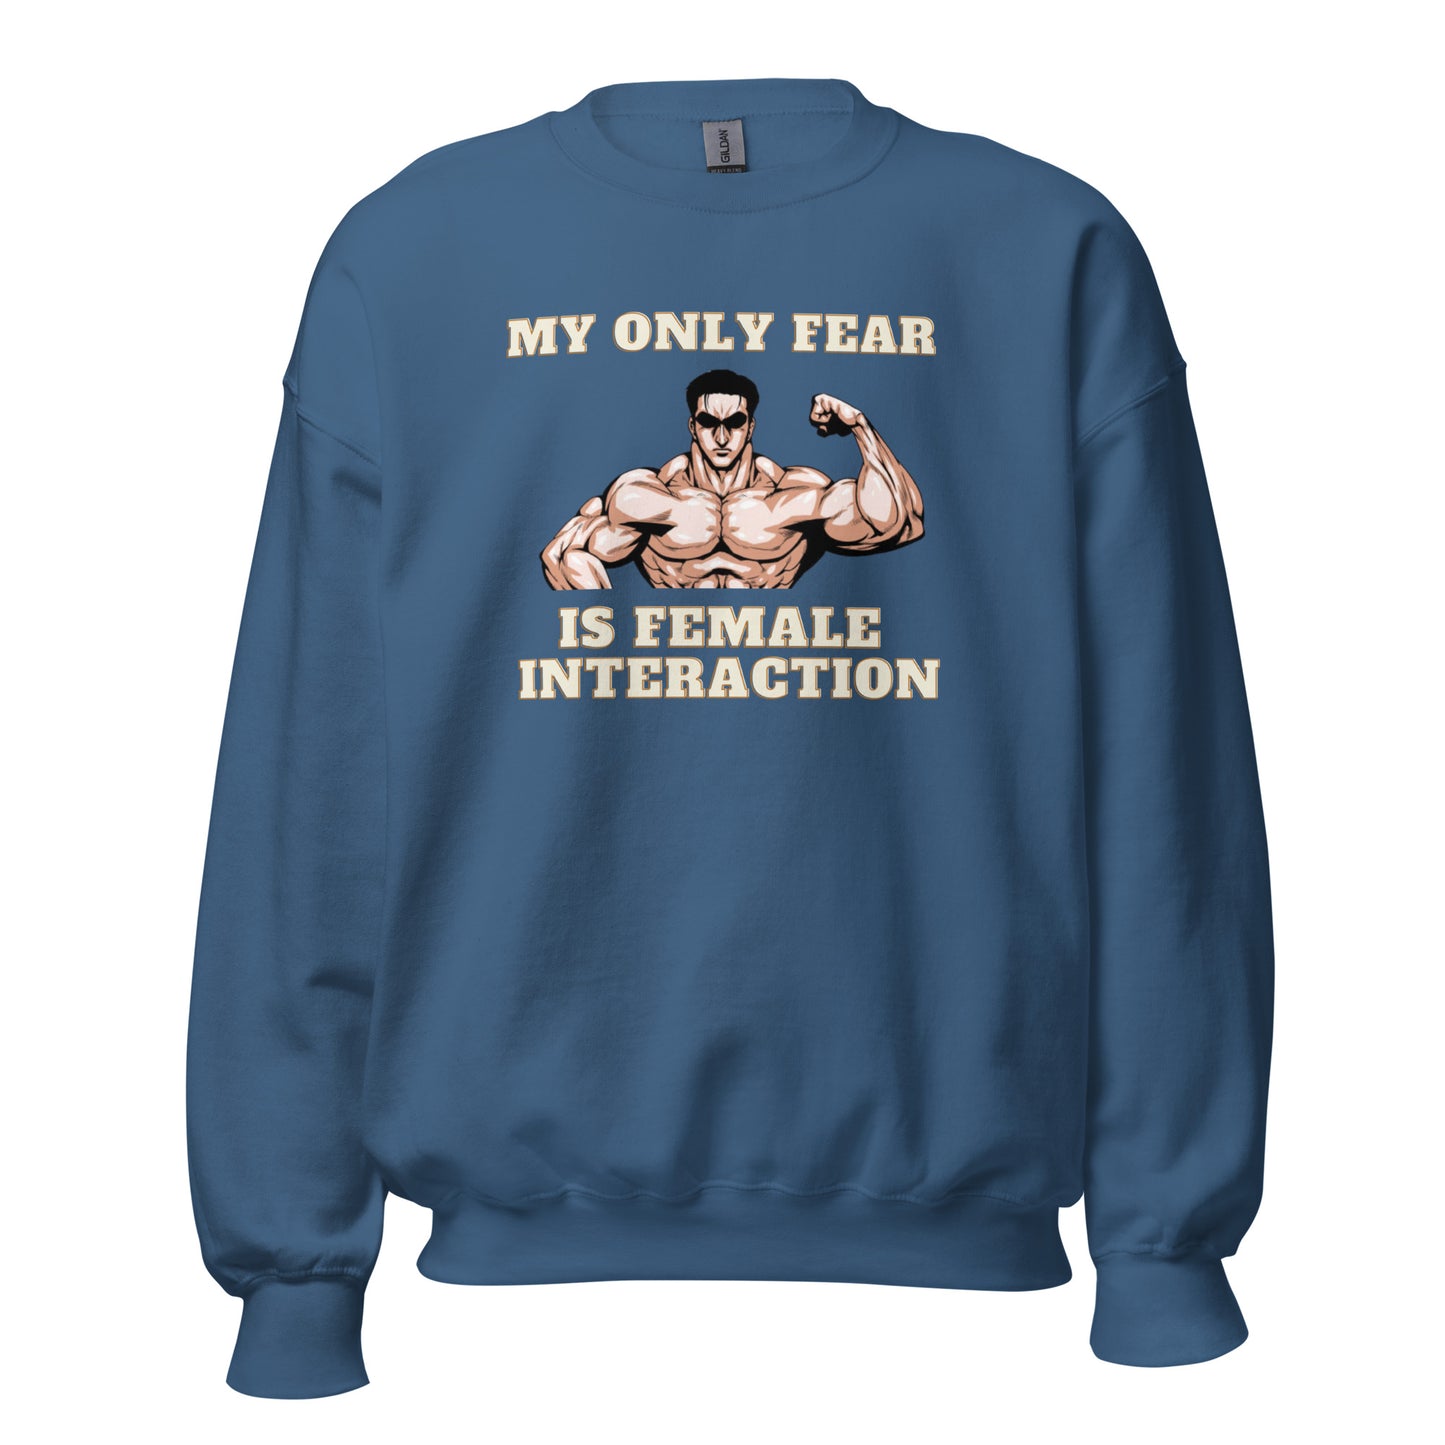 MY ONLY FEAR IS FEMALE INTERACTION